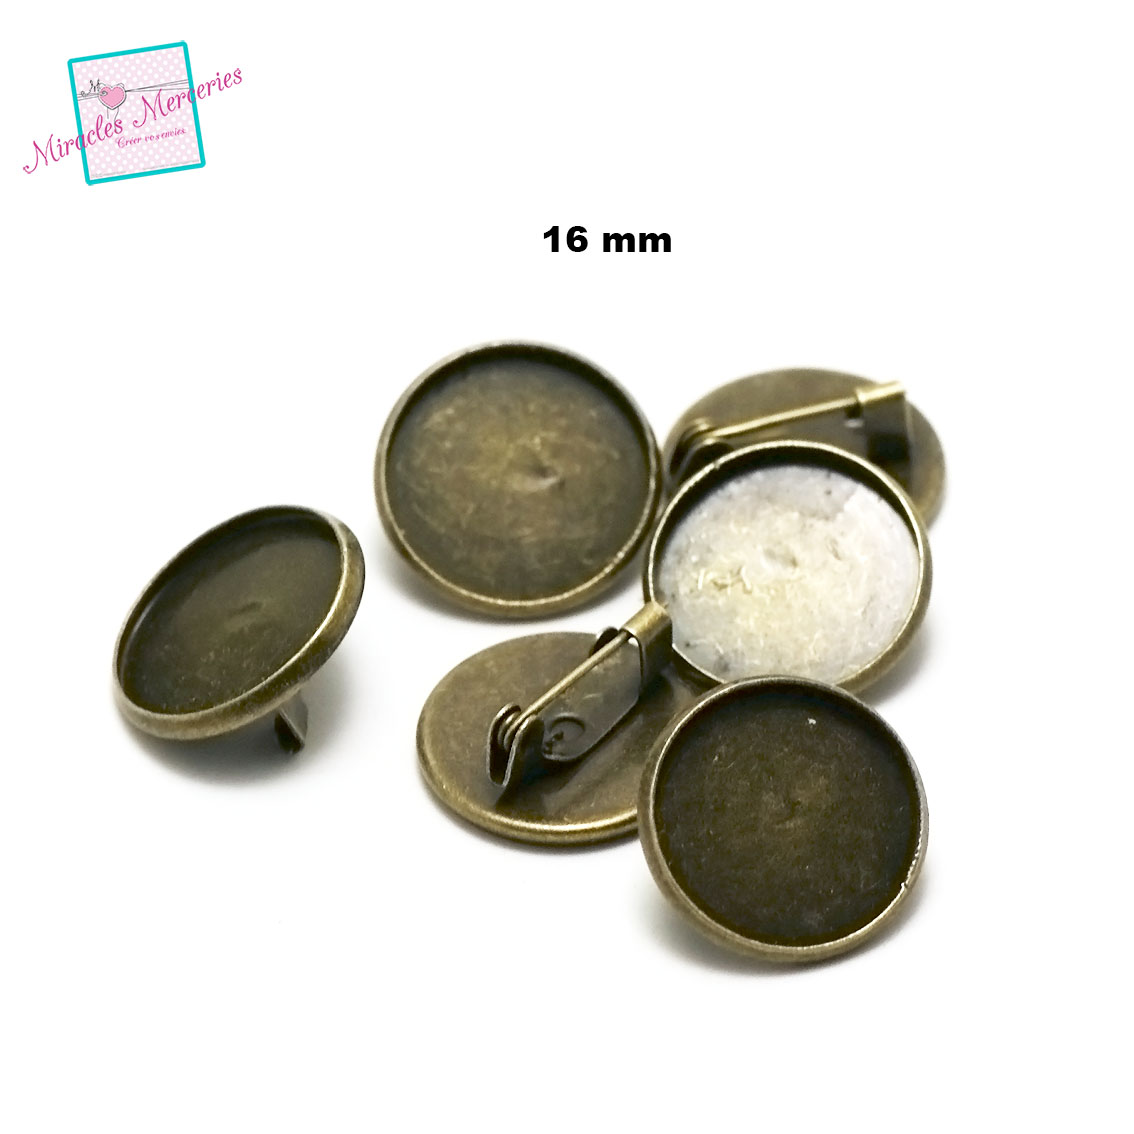 10 broches support cabochon ronde 16 mm,bronze